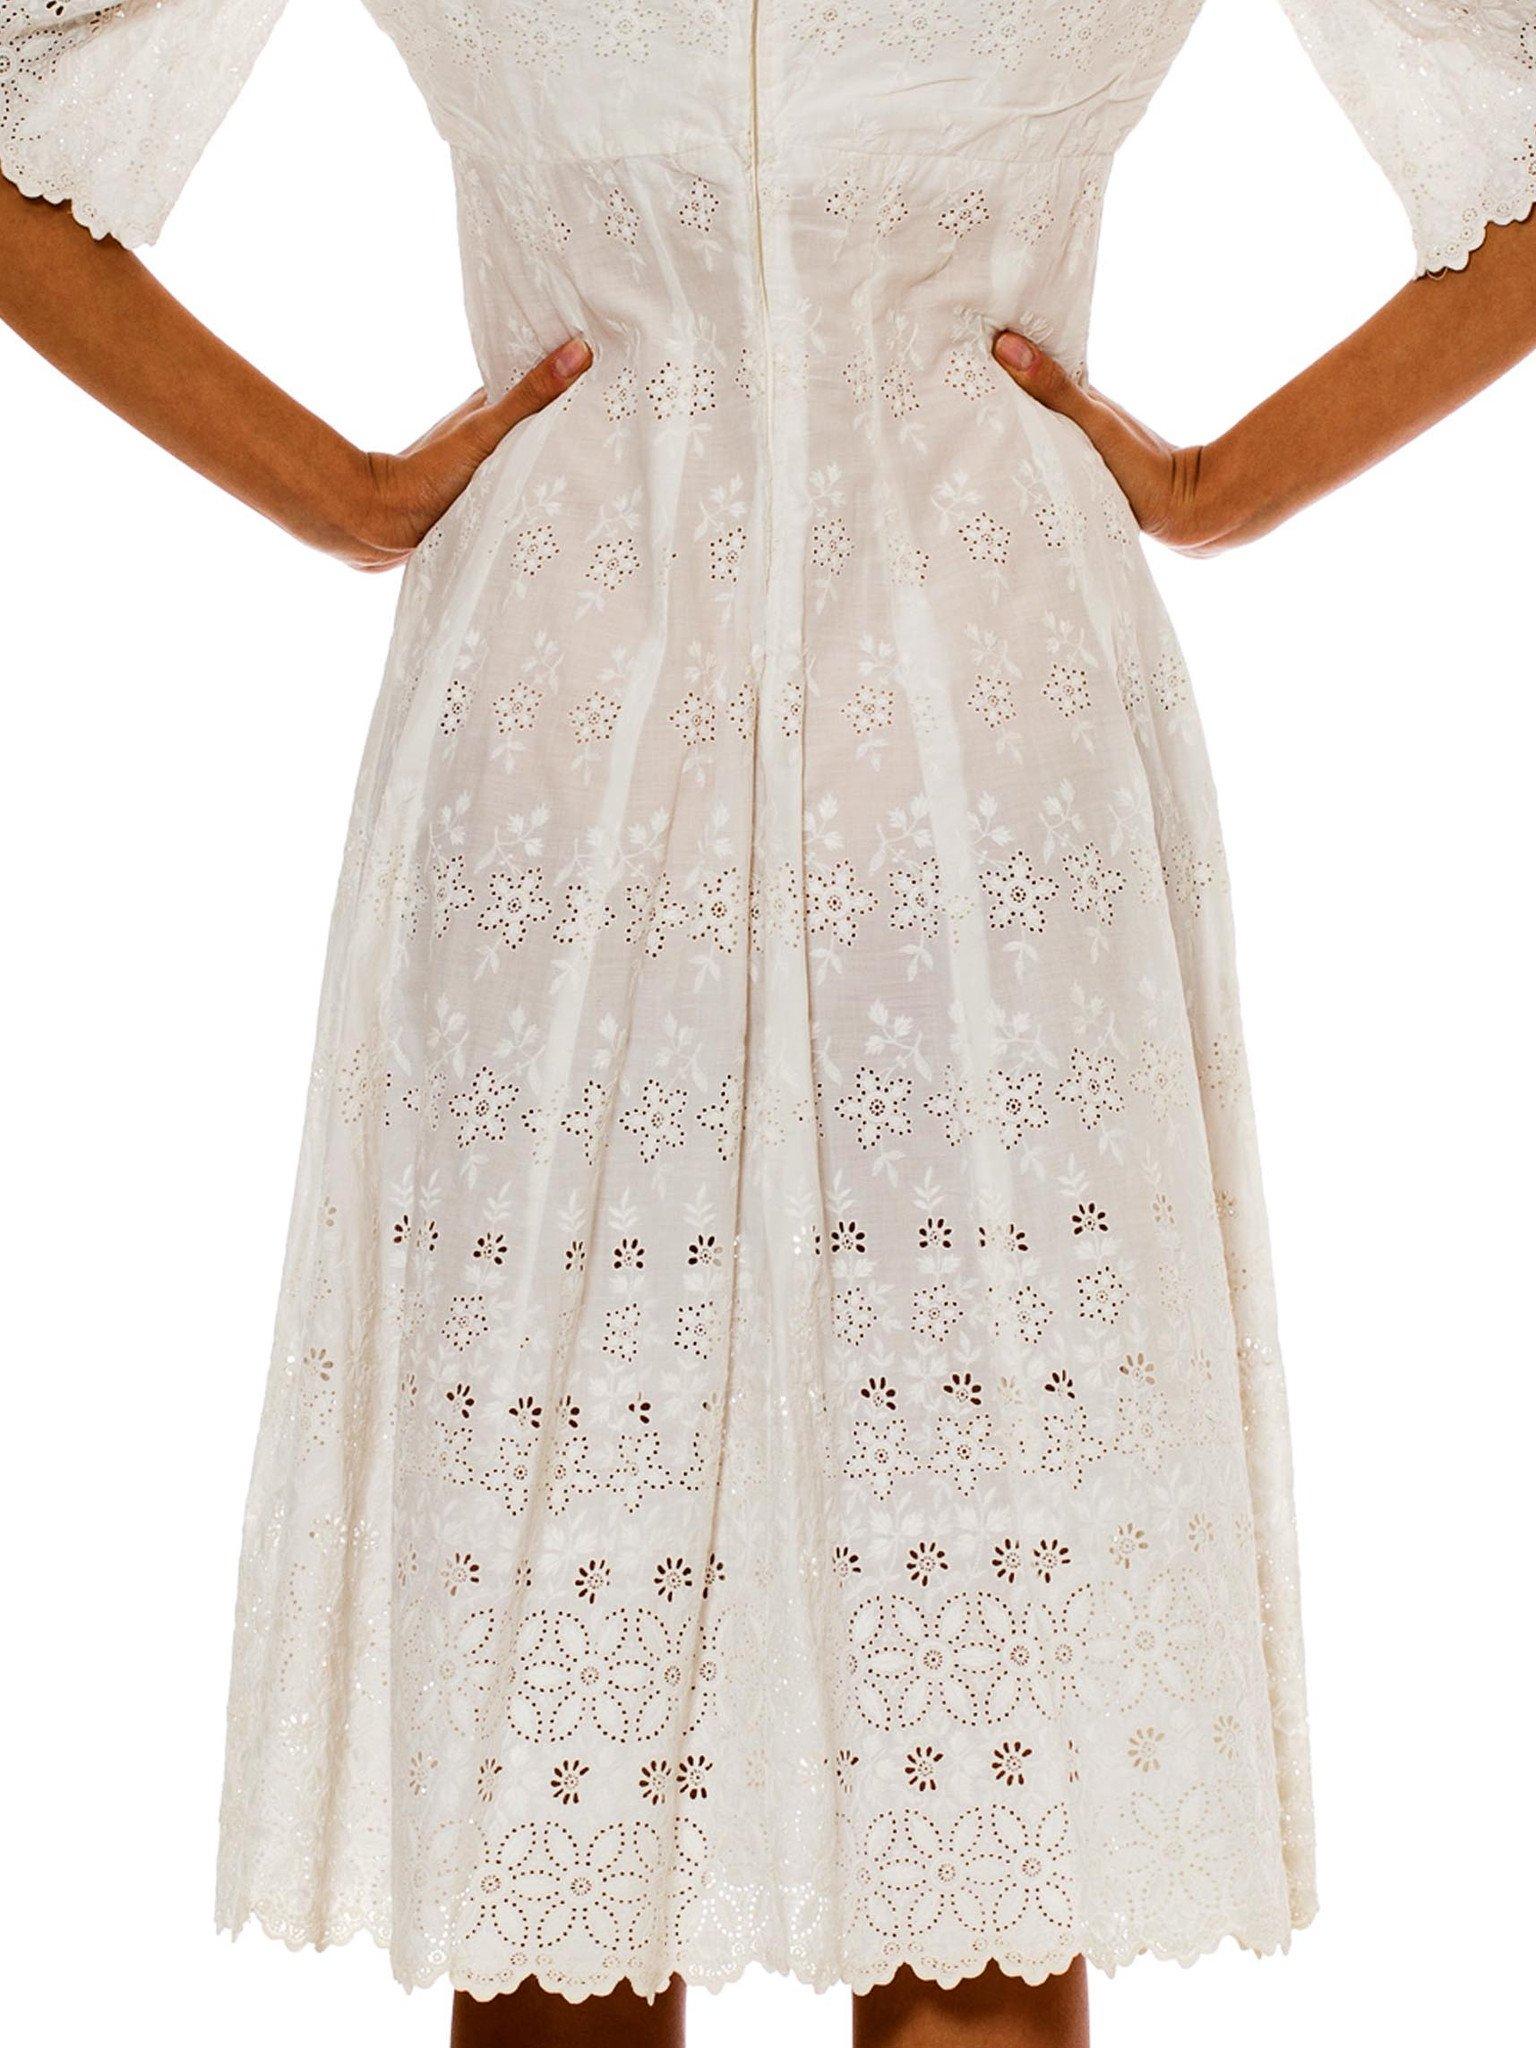 Victorian White Organic Cotton Dress With Floral Eyelet Embroidery & Scalloped  For Sale 3